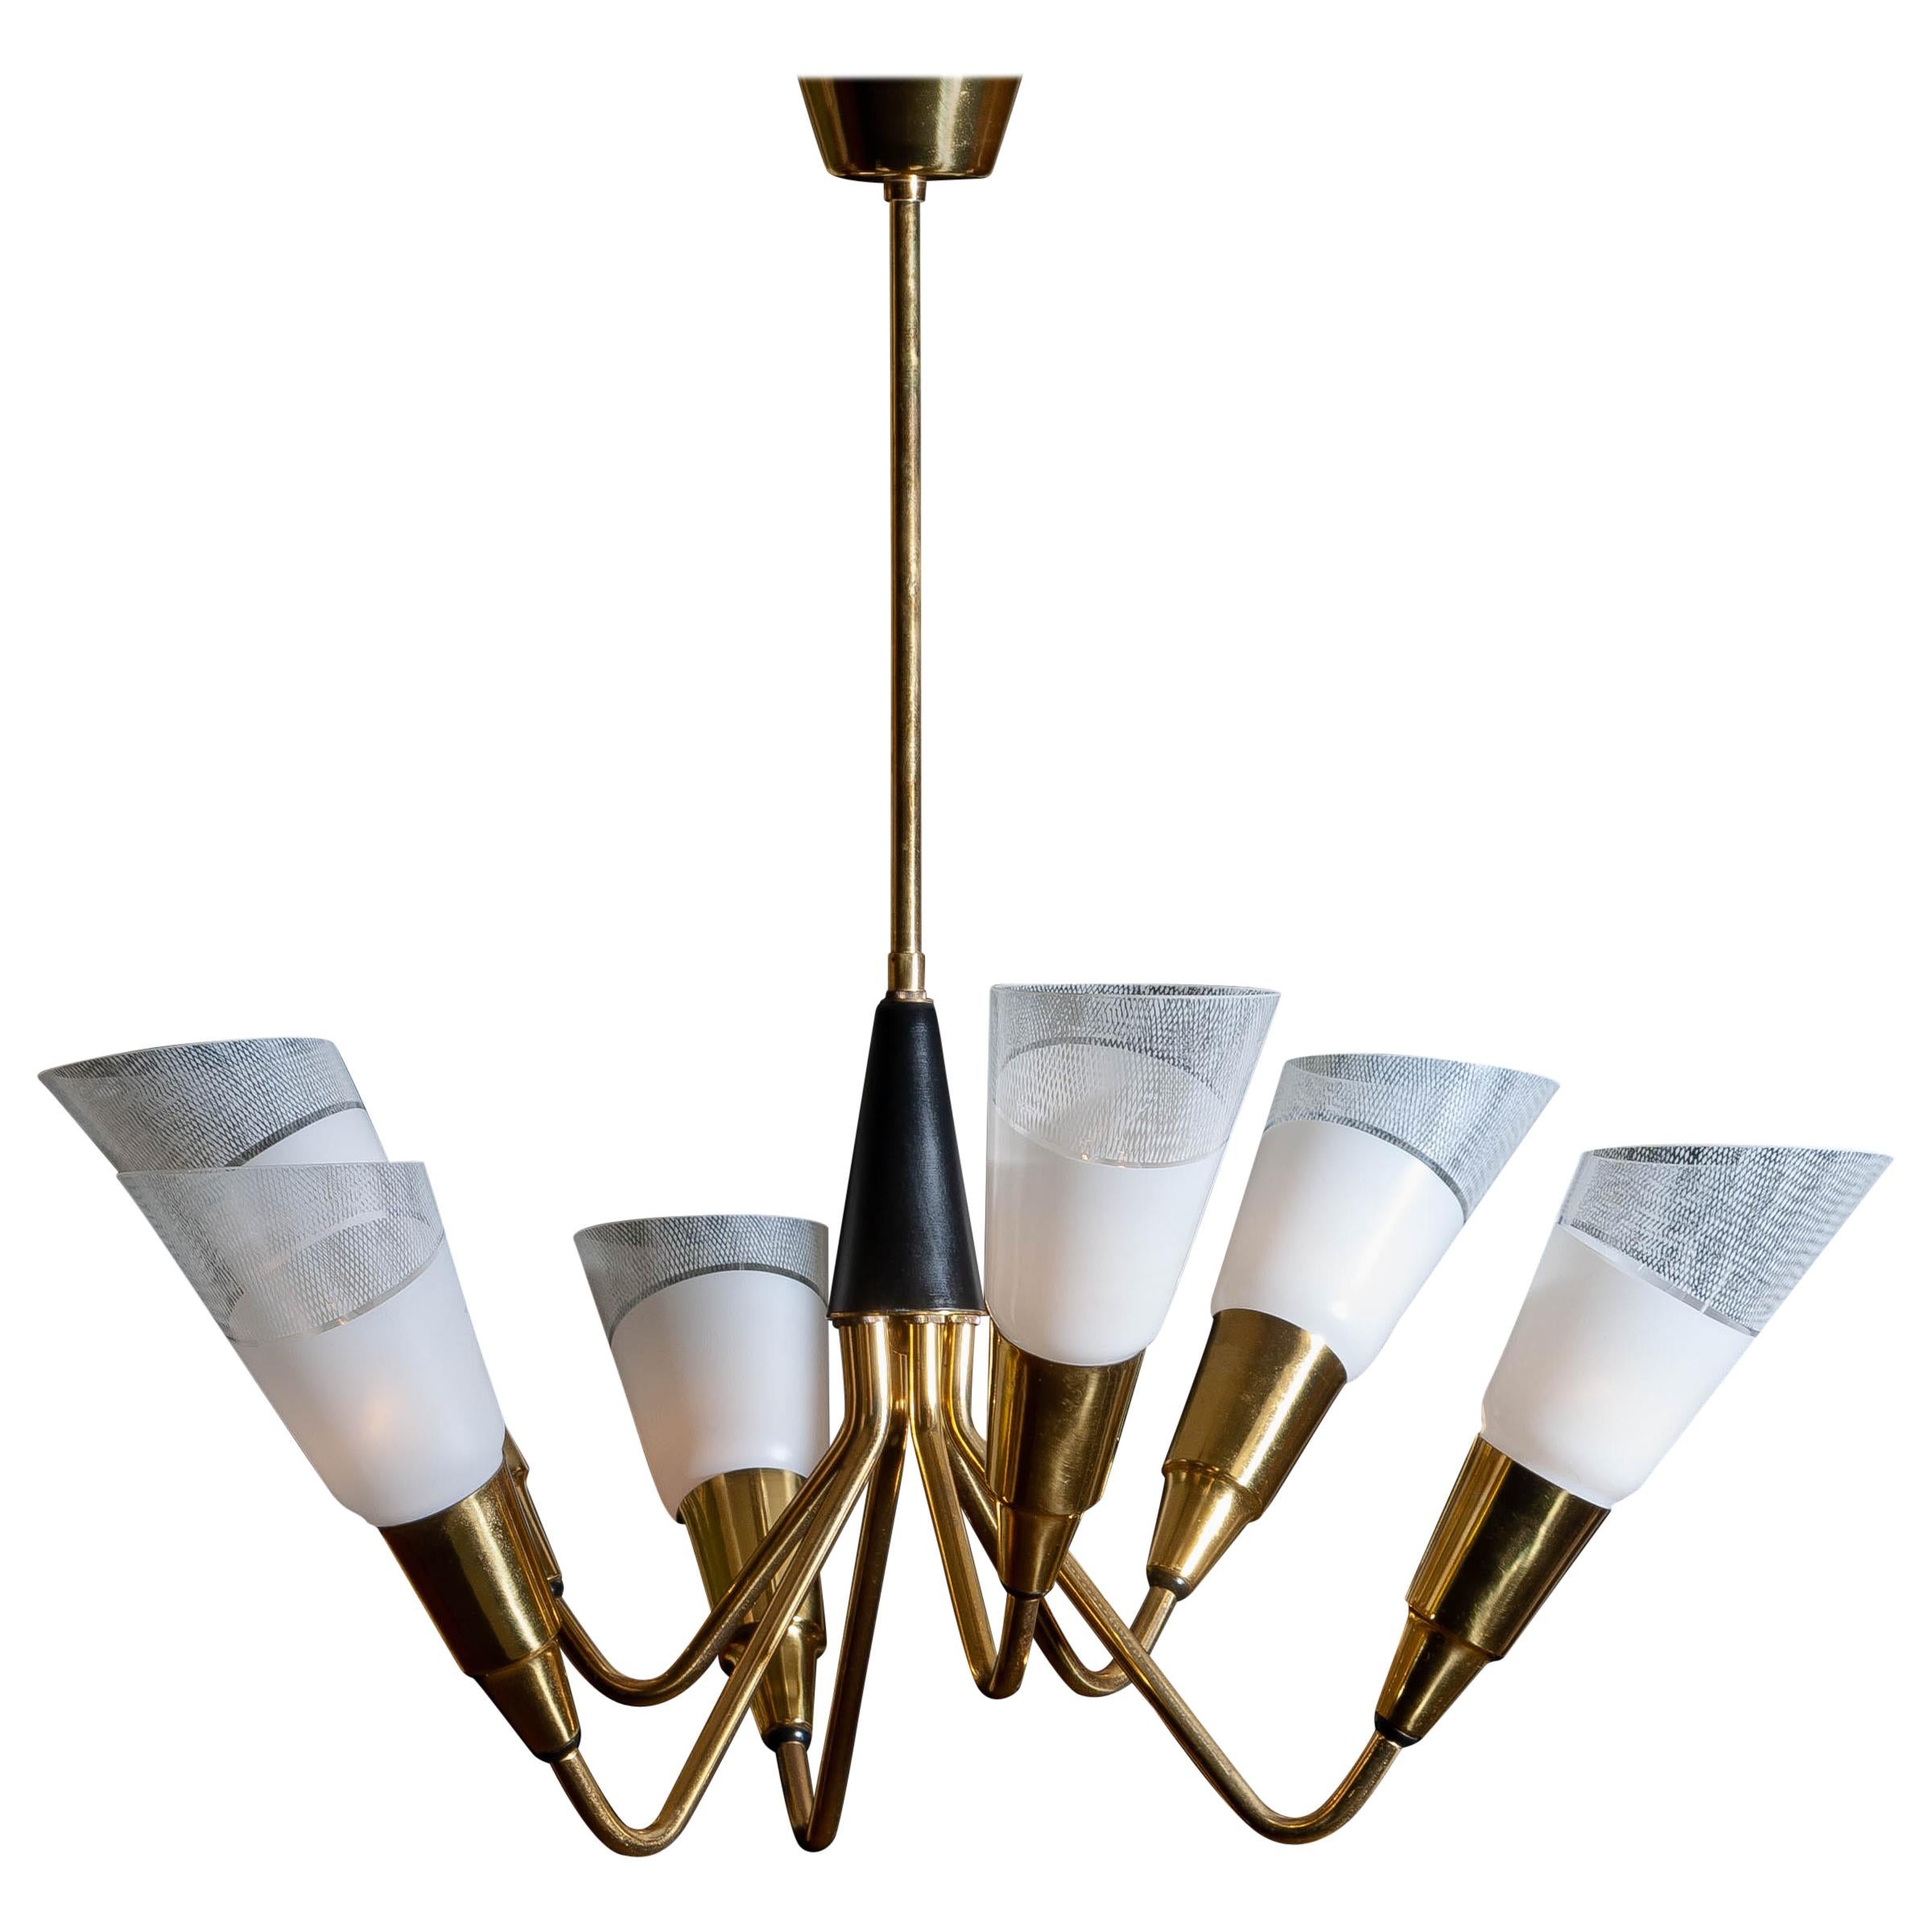 1960 beautiful and excellent Italian chandelier in brass with six frosted crystal shades.
Six E14 /E17 fittings for 230 / 110 volts. Technically 100%
Overall condition is very good.